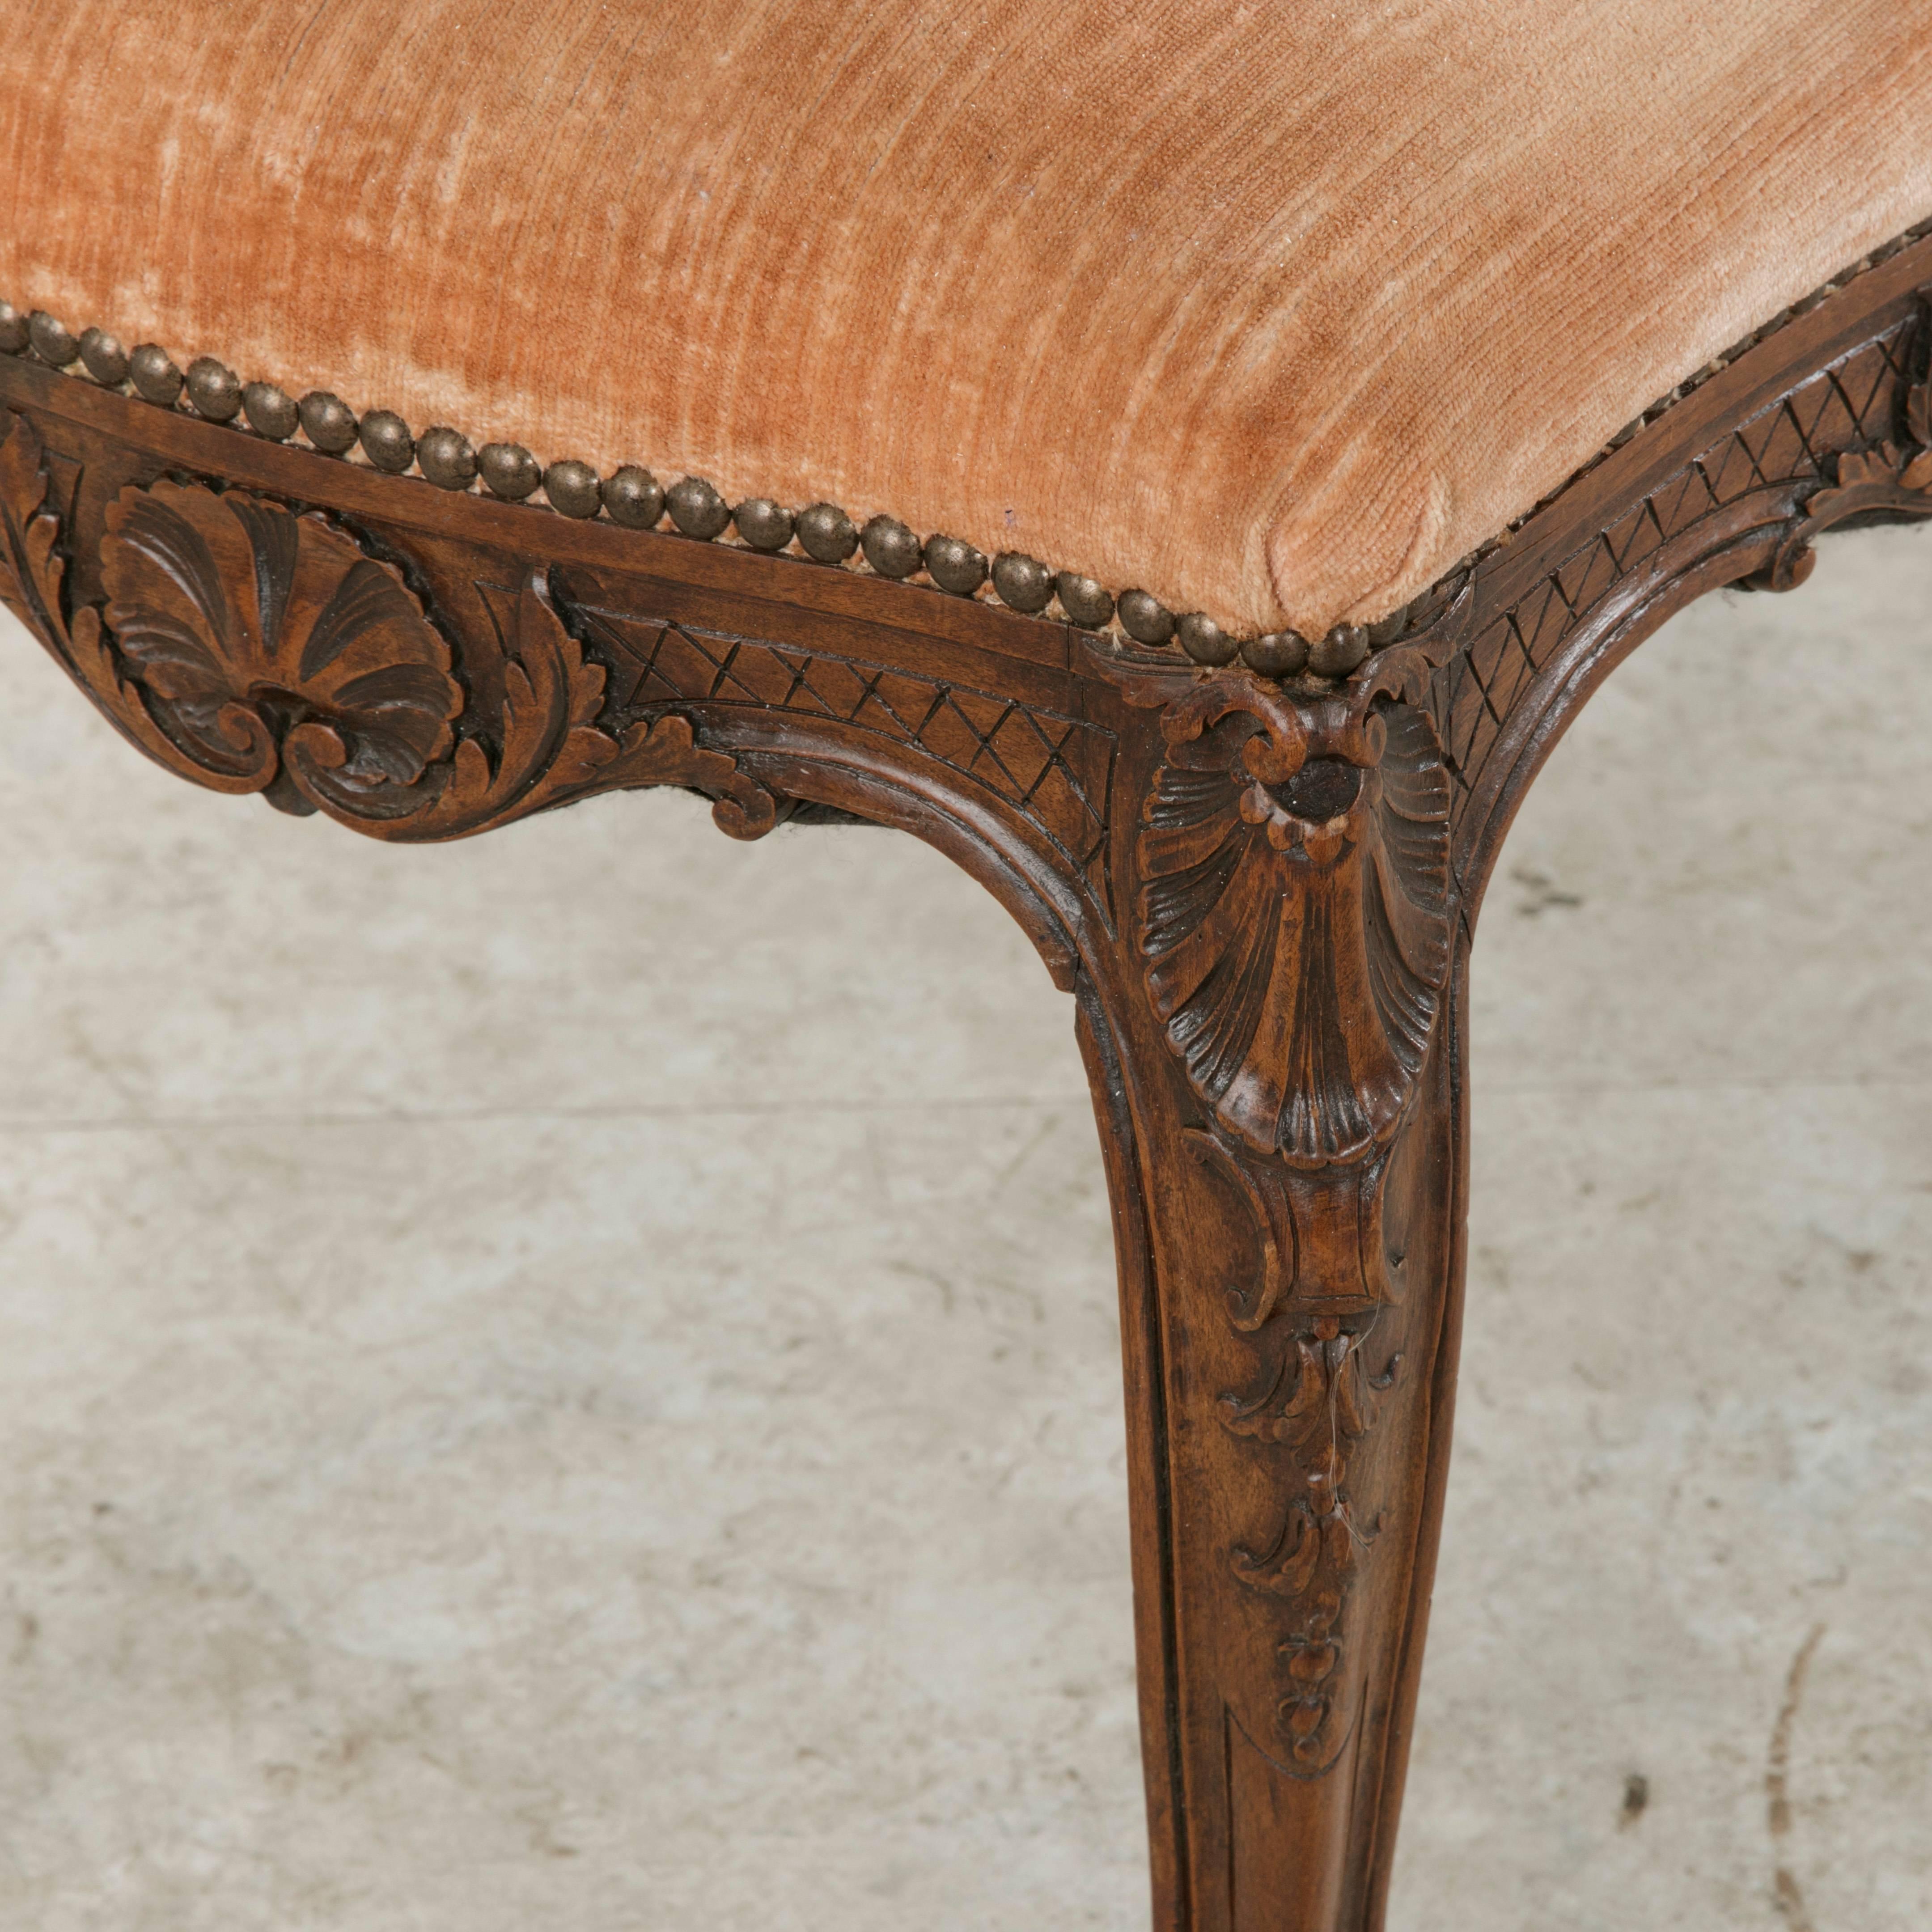 19th Century French Regency Style Hand-Carved Walnut Piano Bench Banquette Stool 6